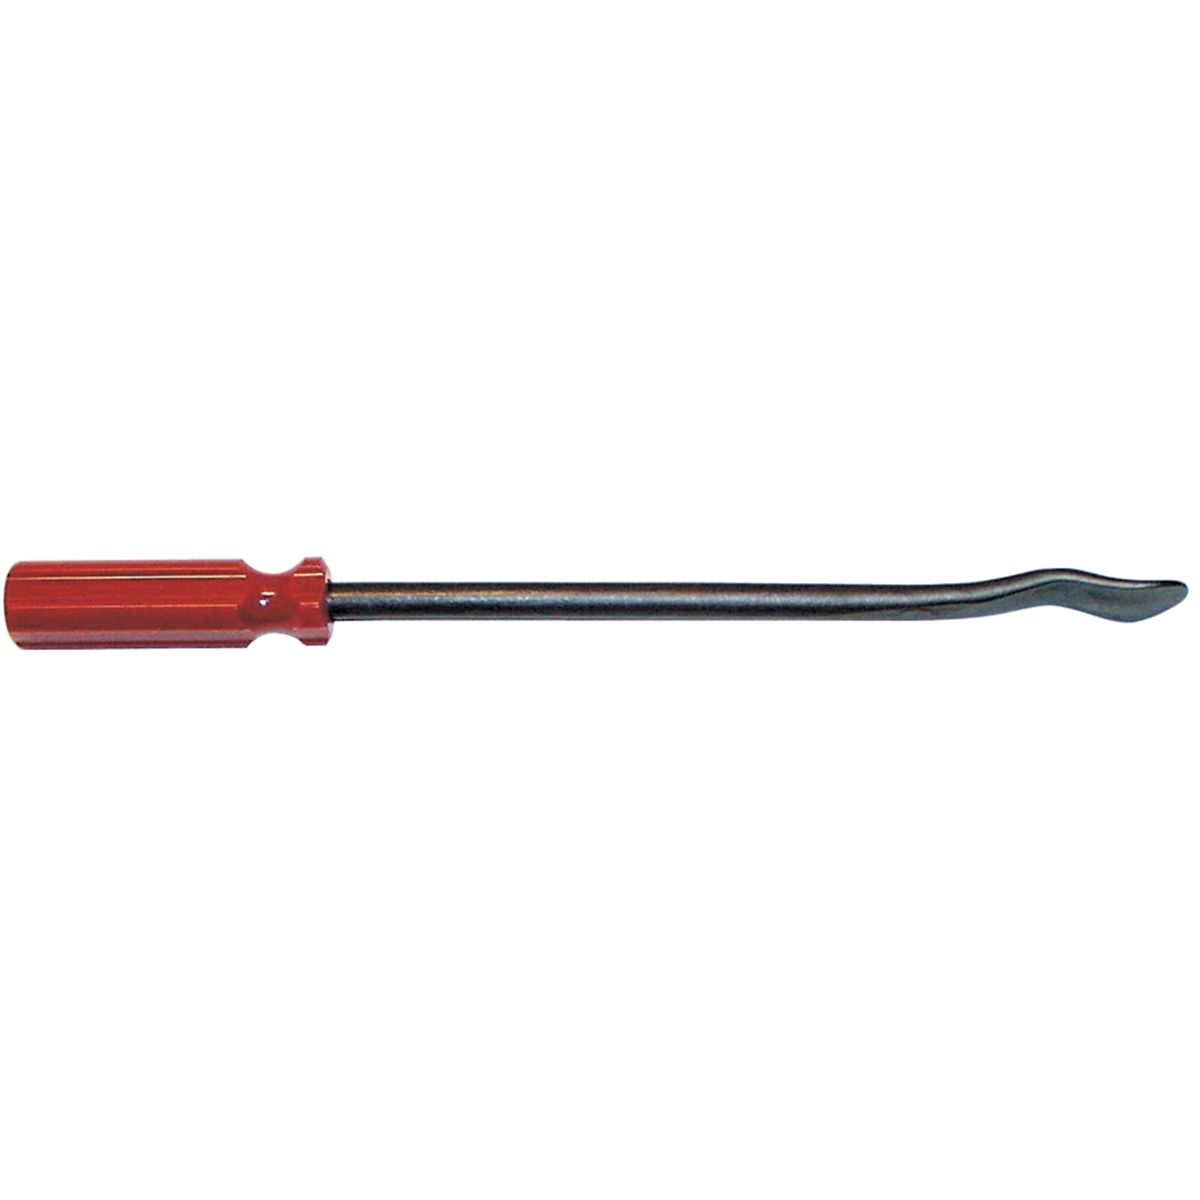 Small Handled Tire Iron - T5